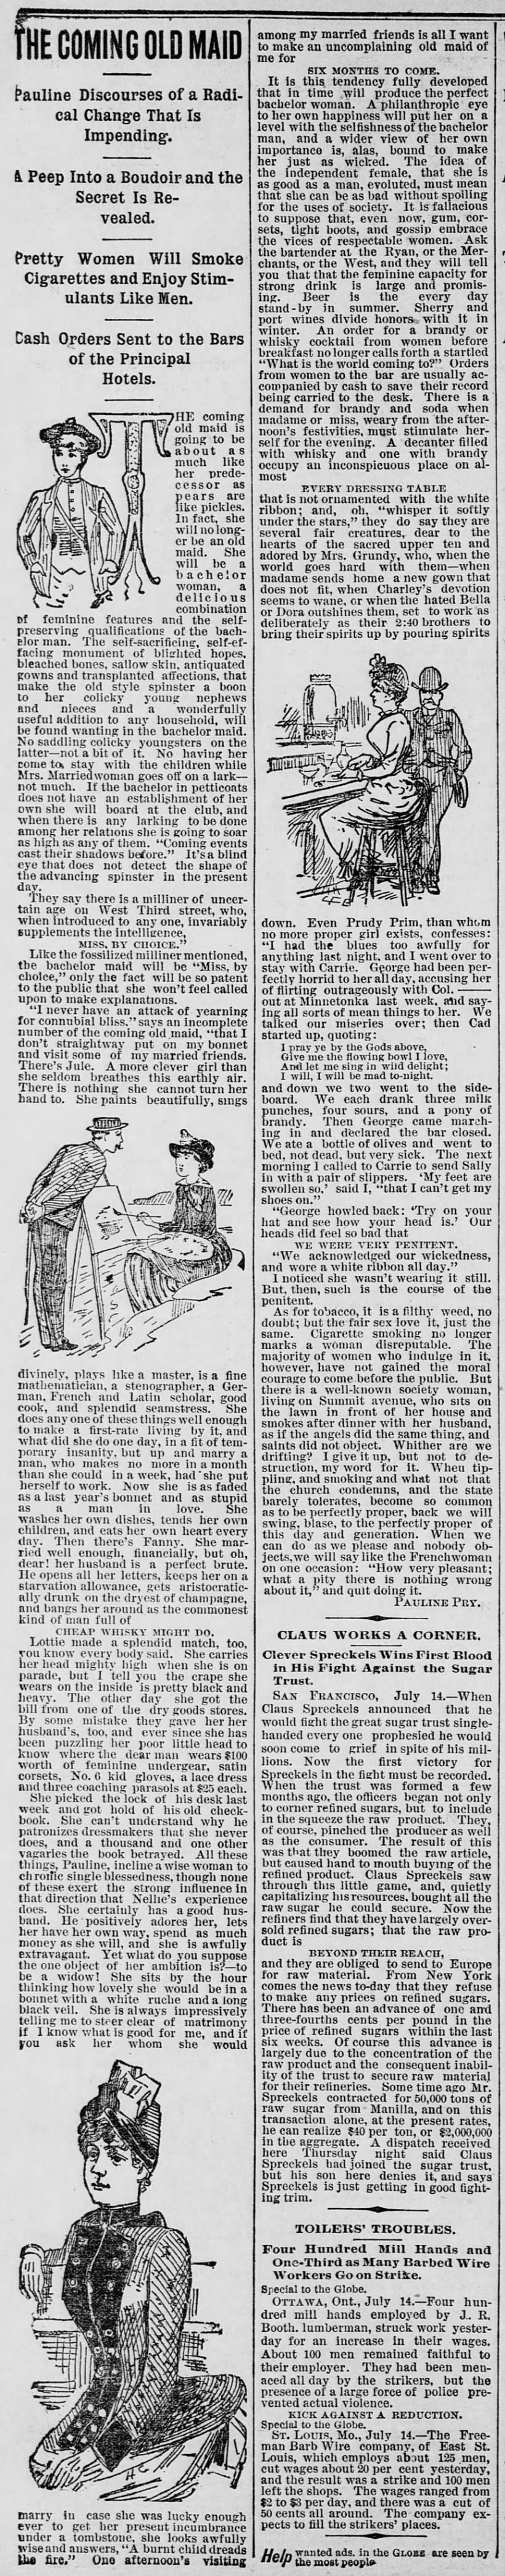 Early column about "bachelor women," 1888